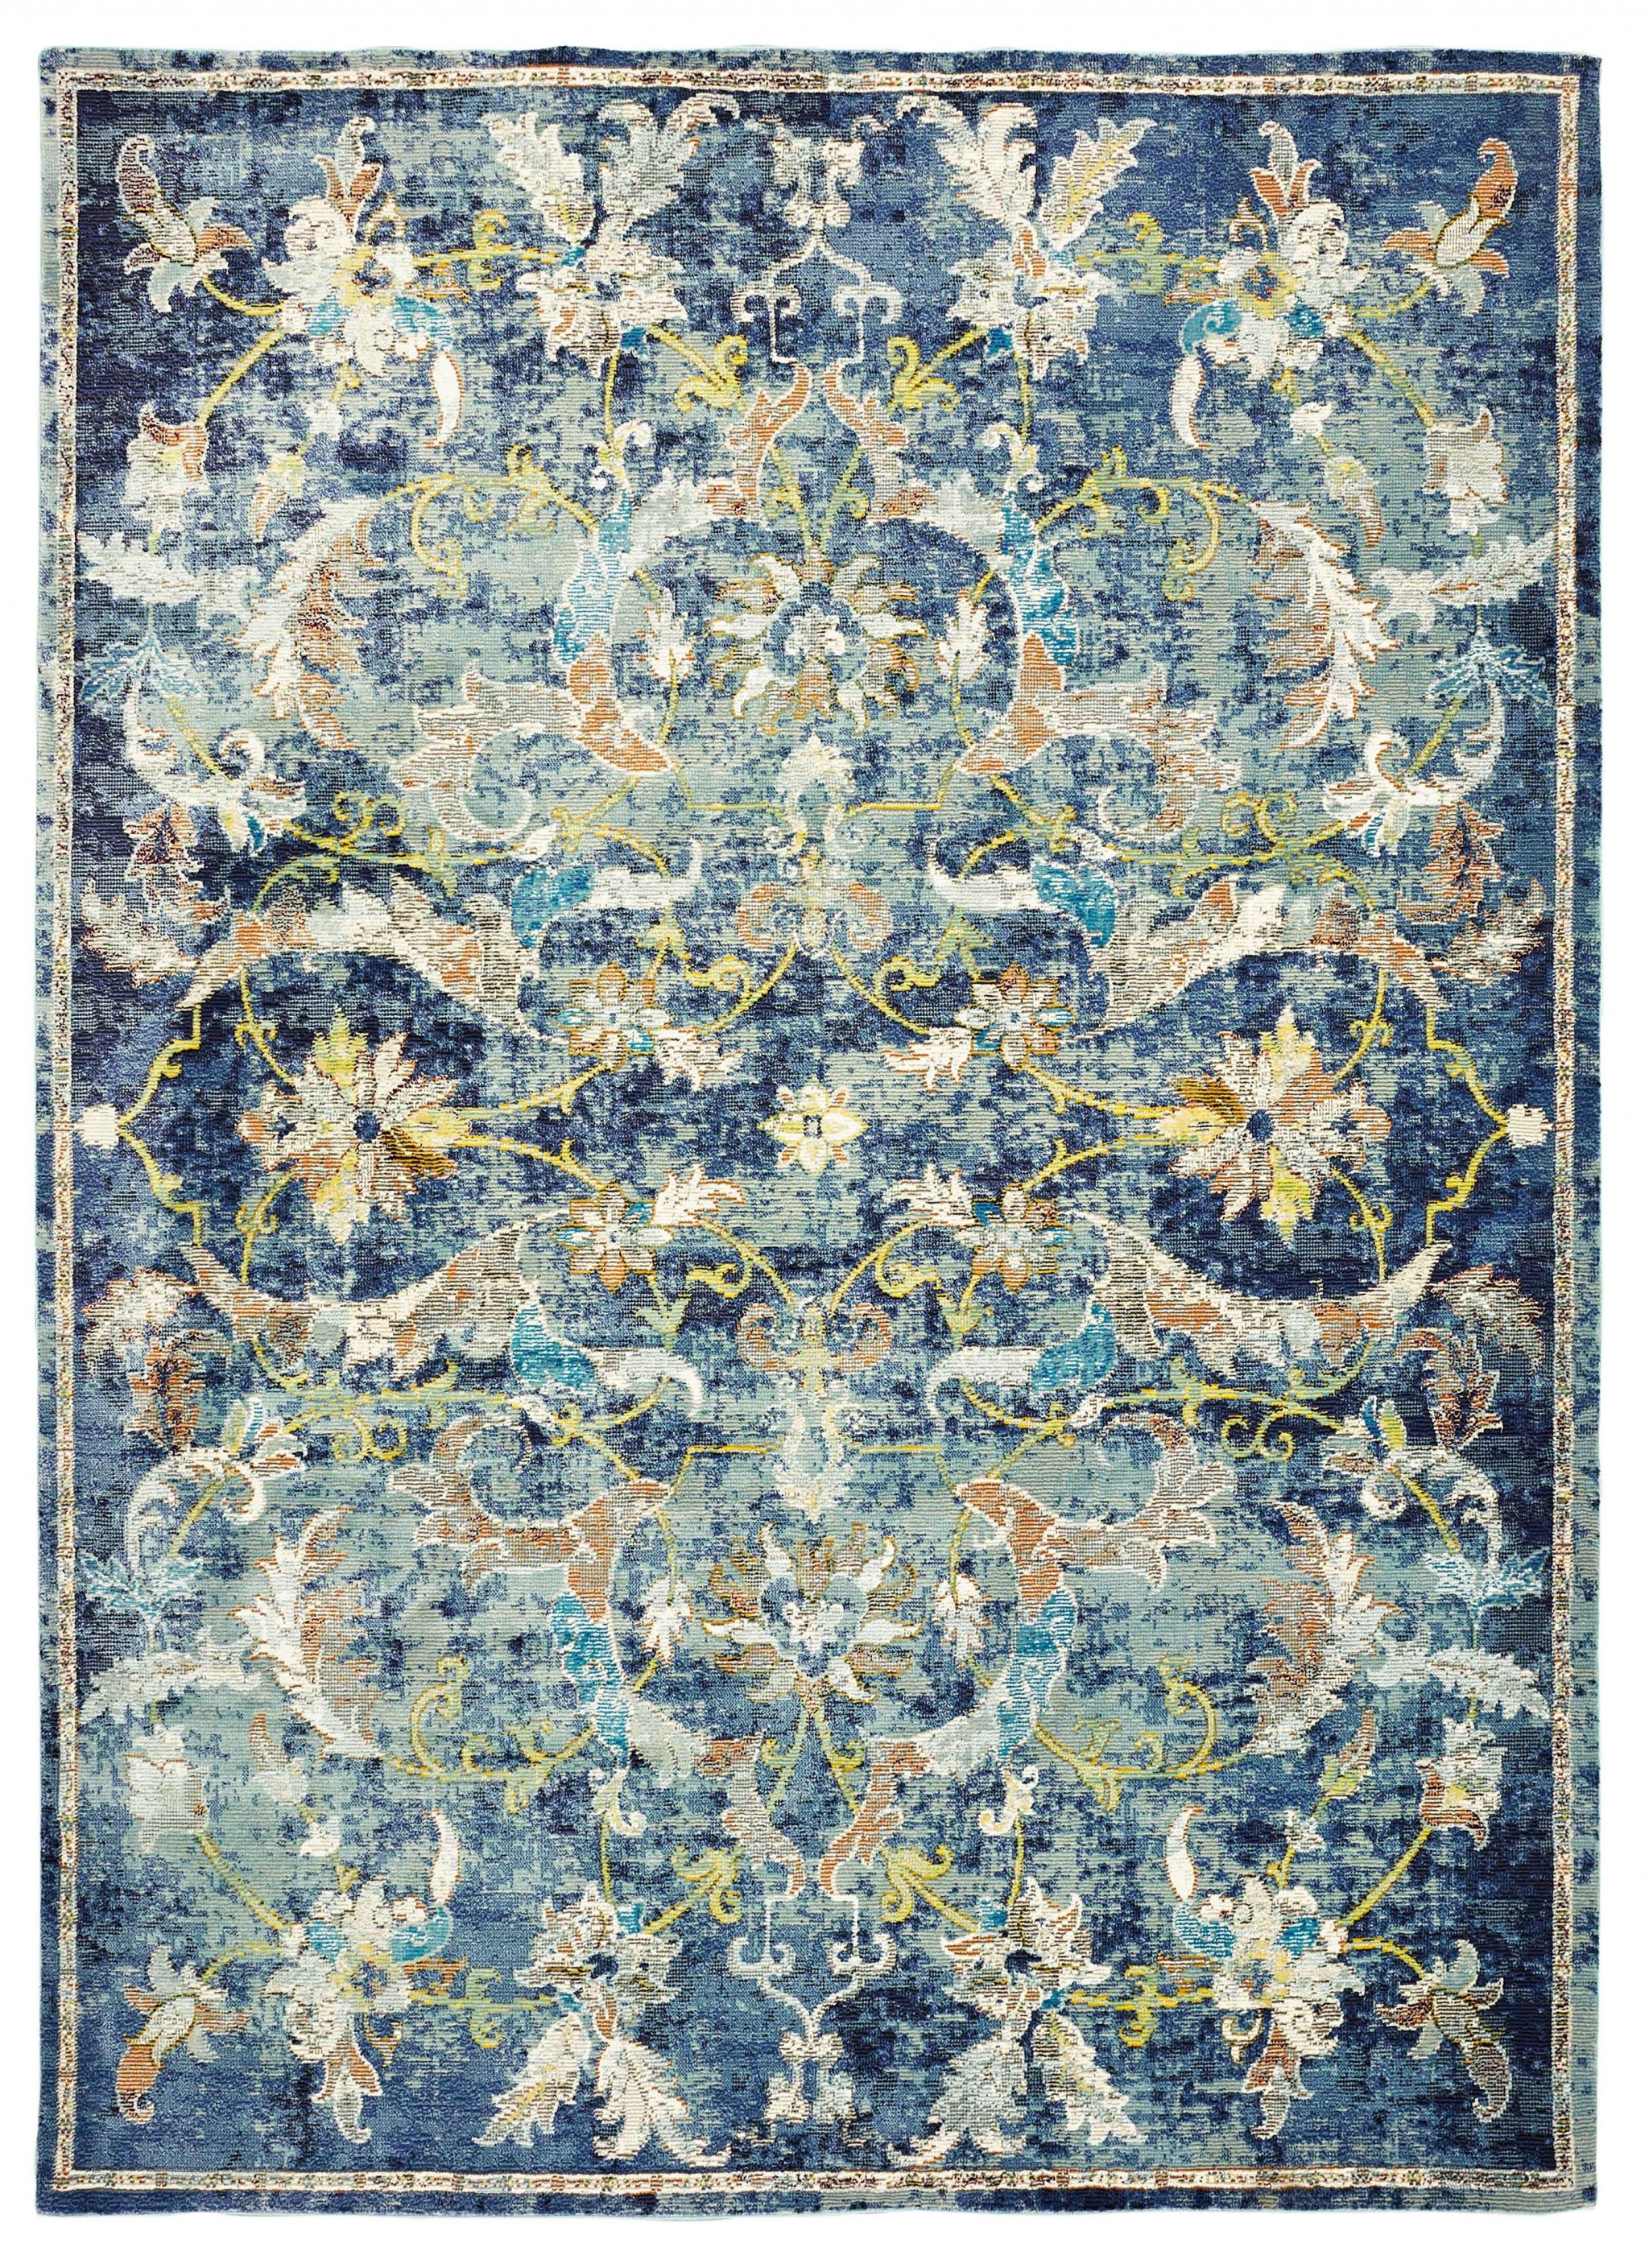 5’ x 8’ Blue and White Jacobean Pattern Area Rug-395705-1